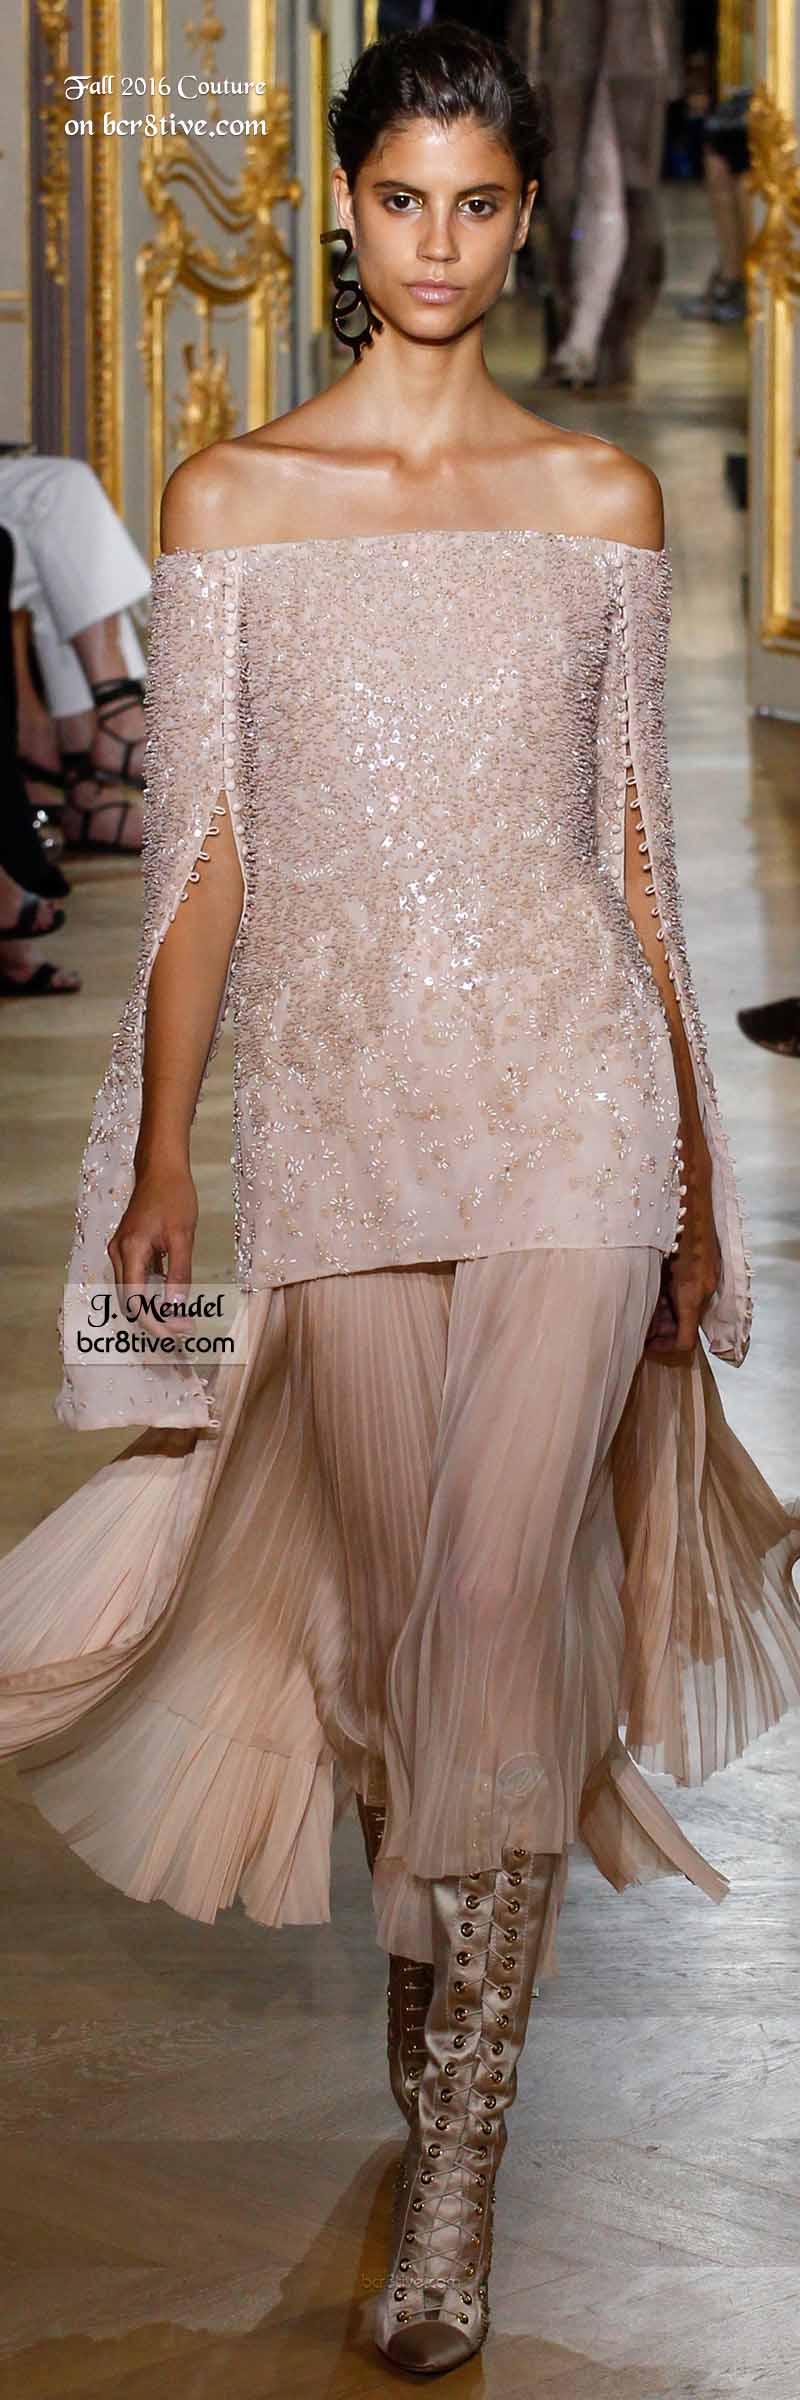 J. Mendel - The Best Fall 2016 Haute Couture Fashion